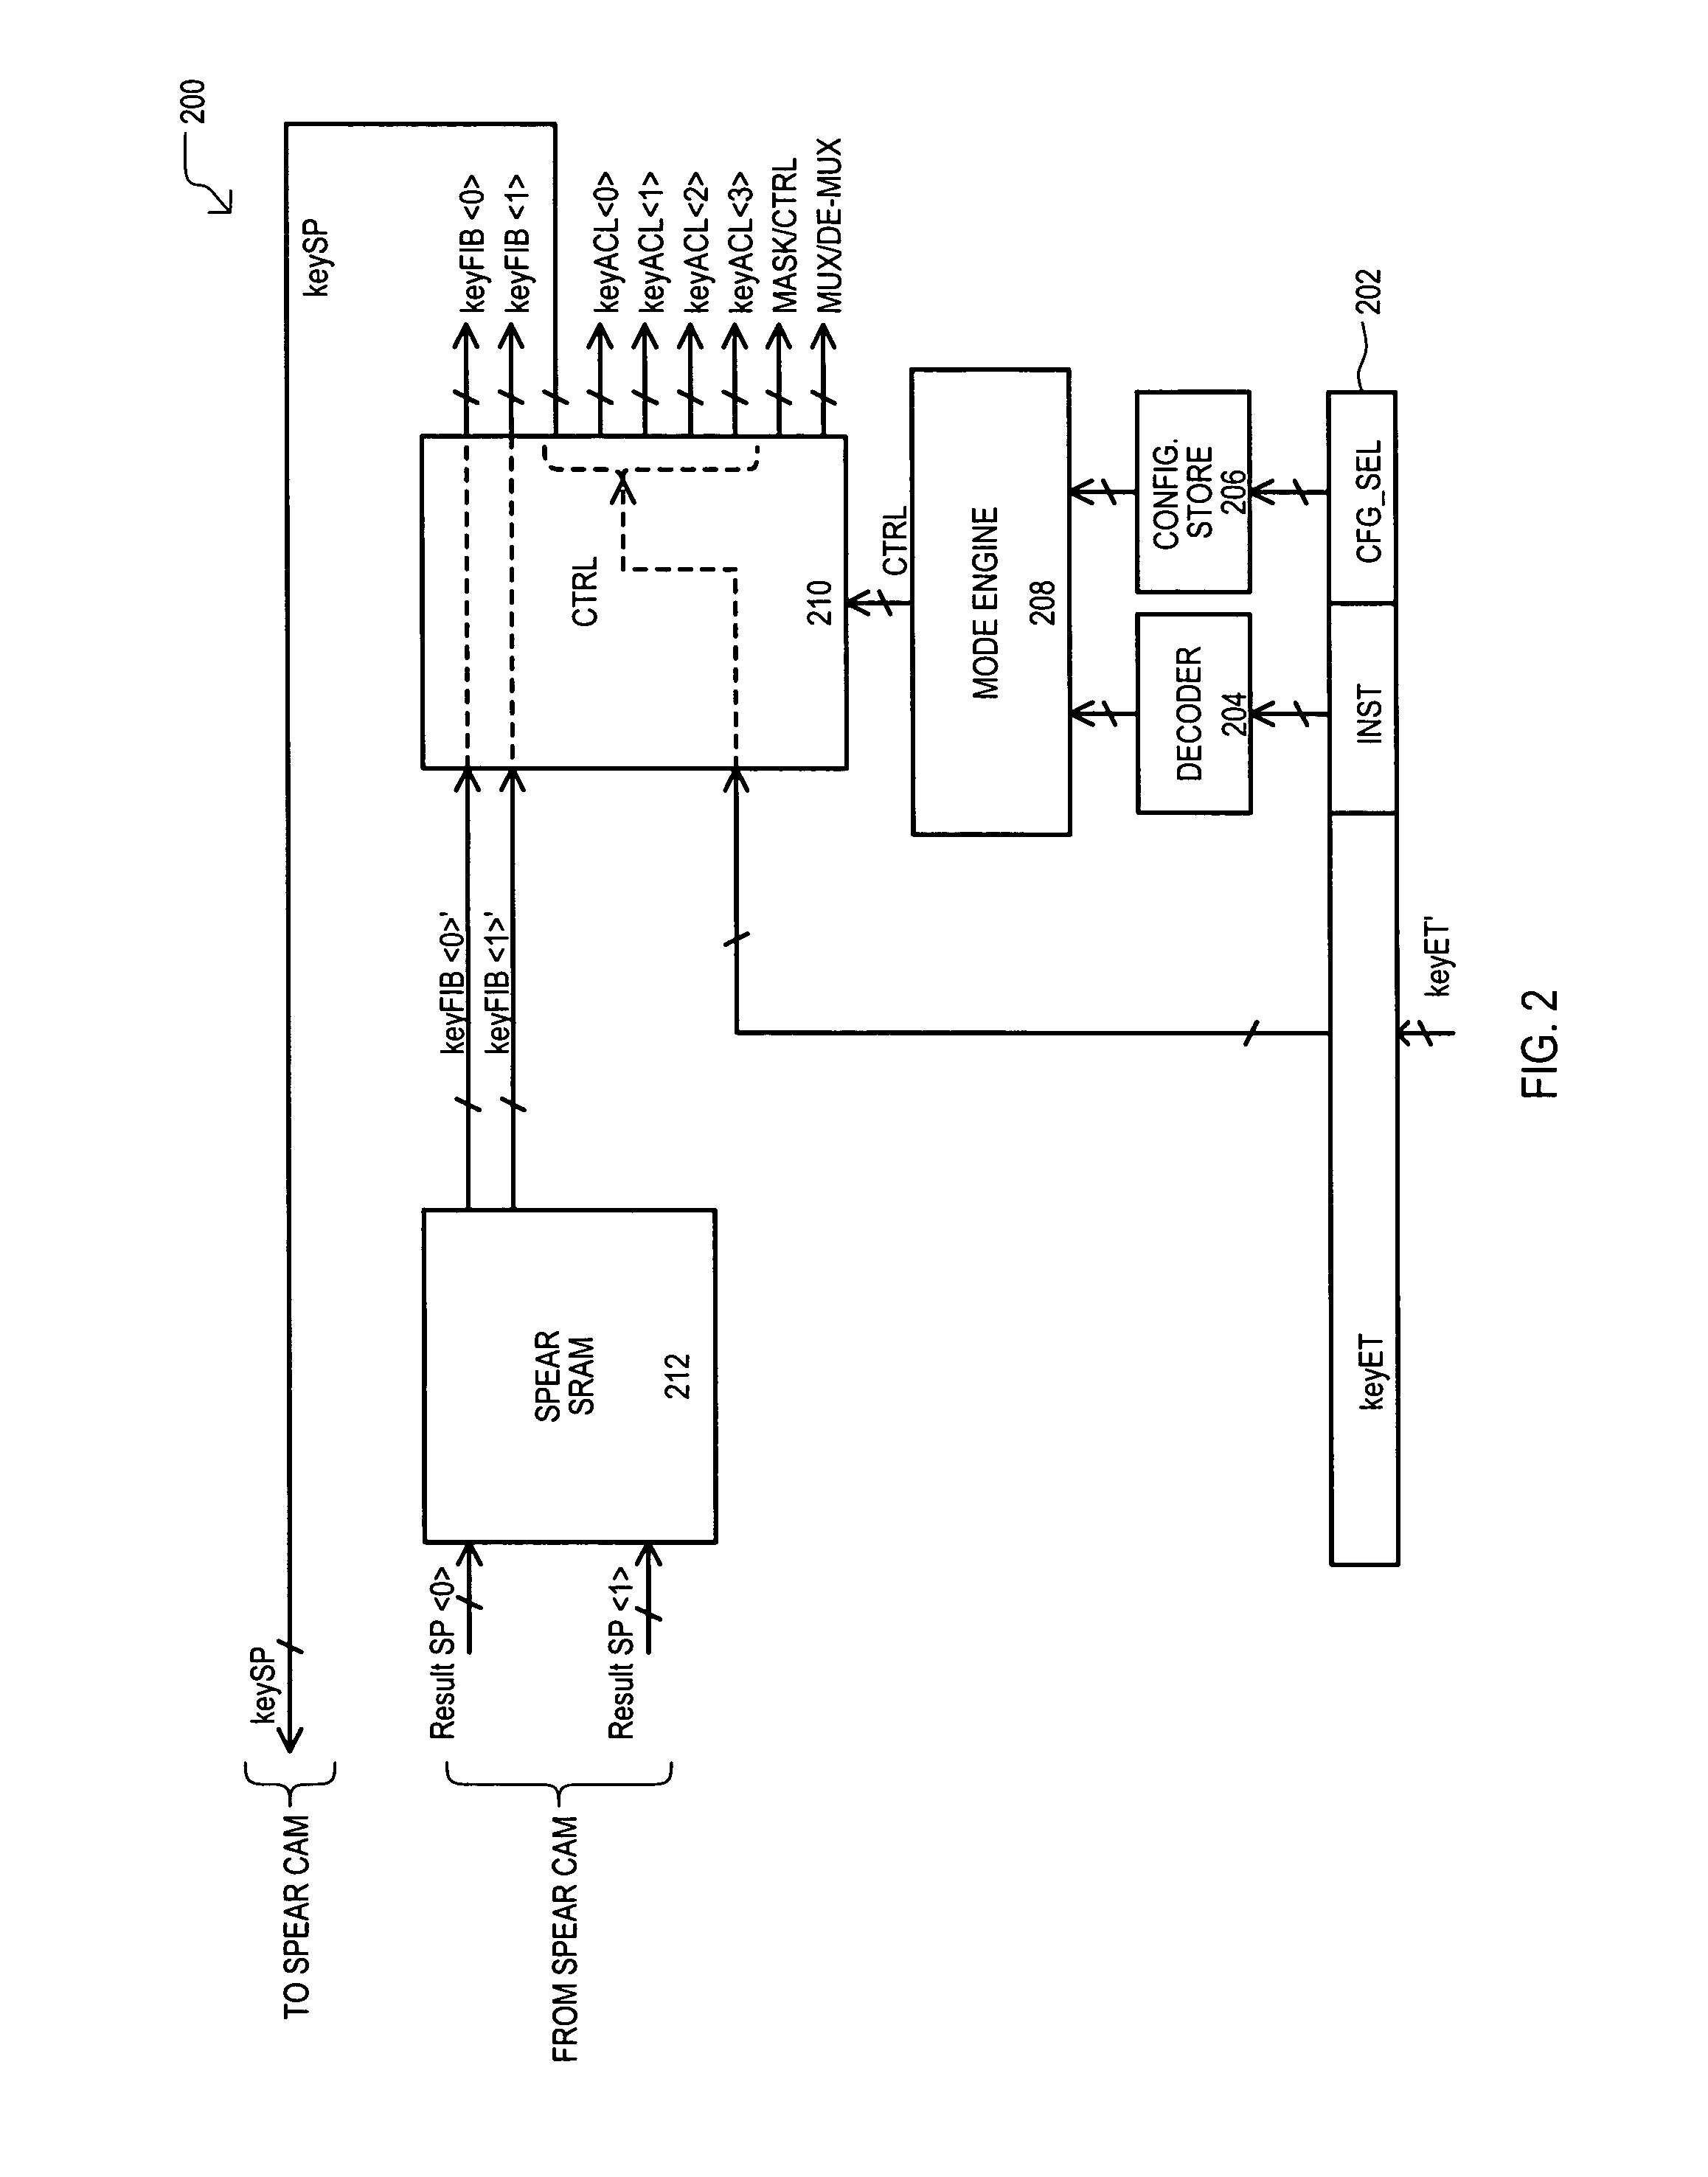 Method and apparatus for overlaying flat and tree based data sets onto content addressable memory (CAM) device